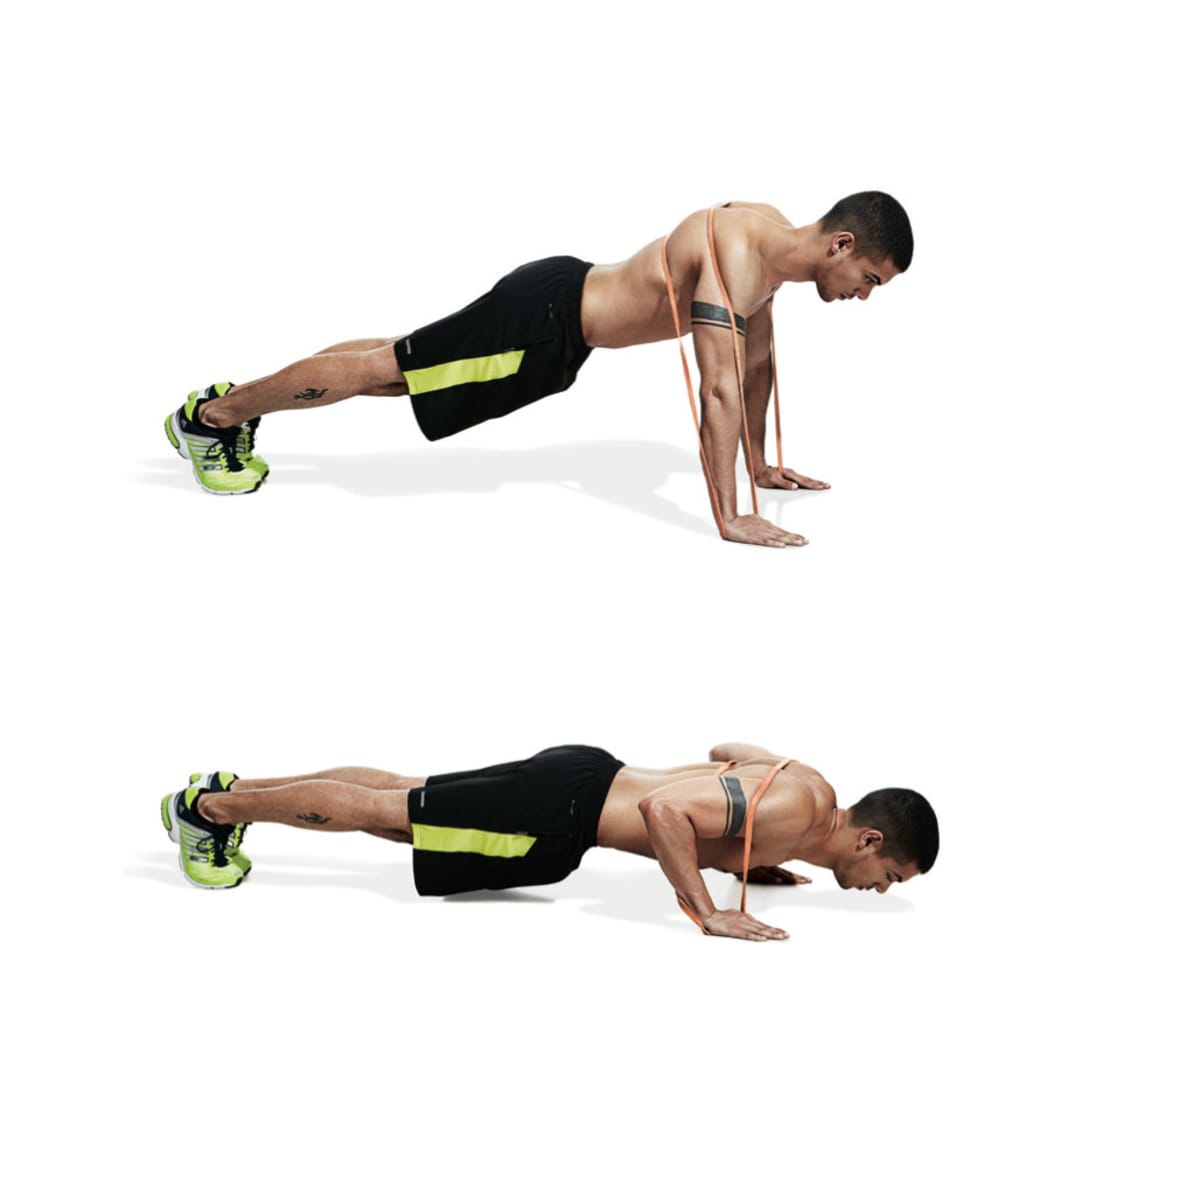 8 Band Workouts For a Total Shape - Men's Journal